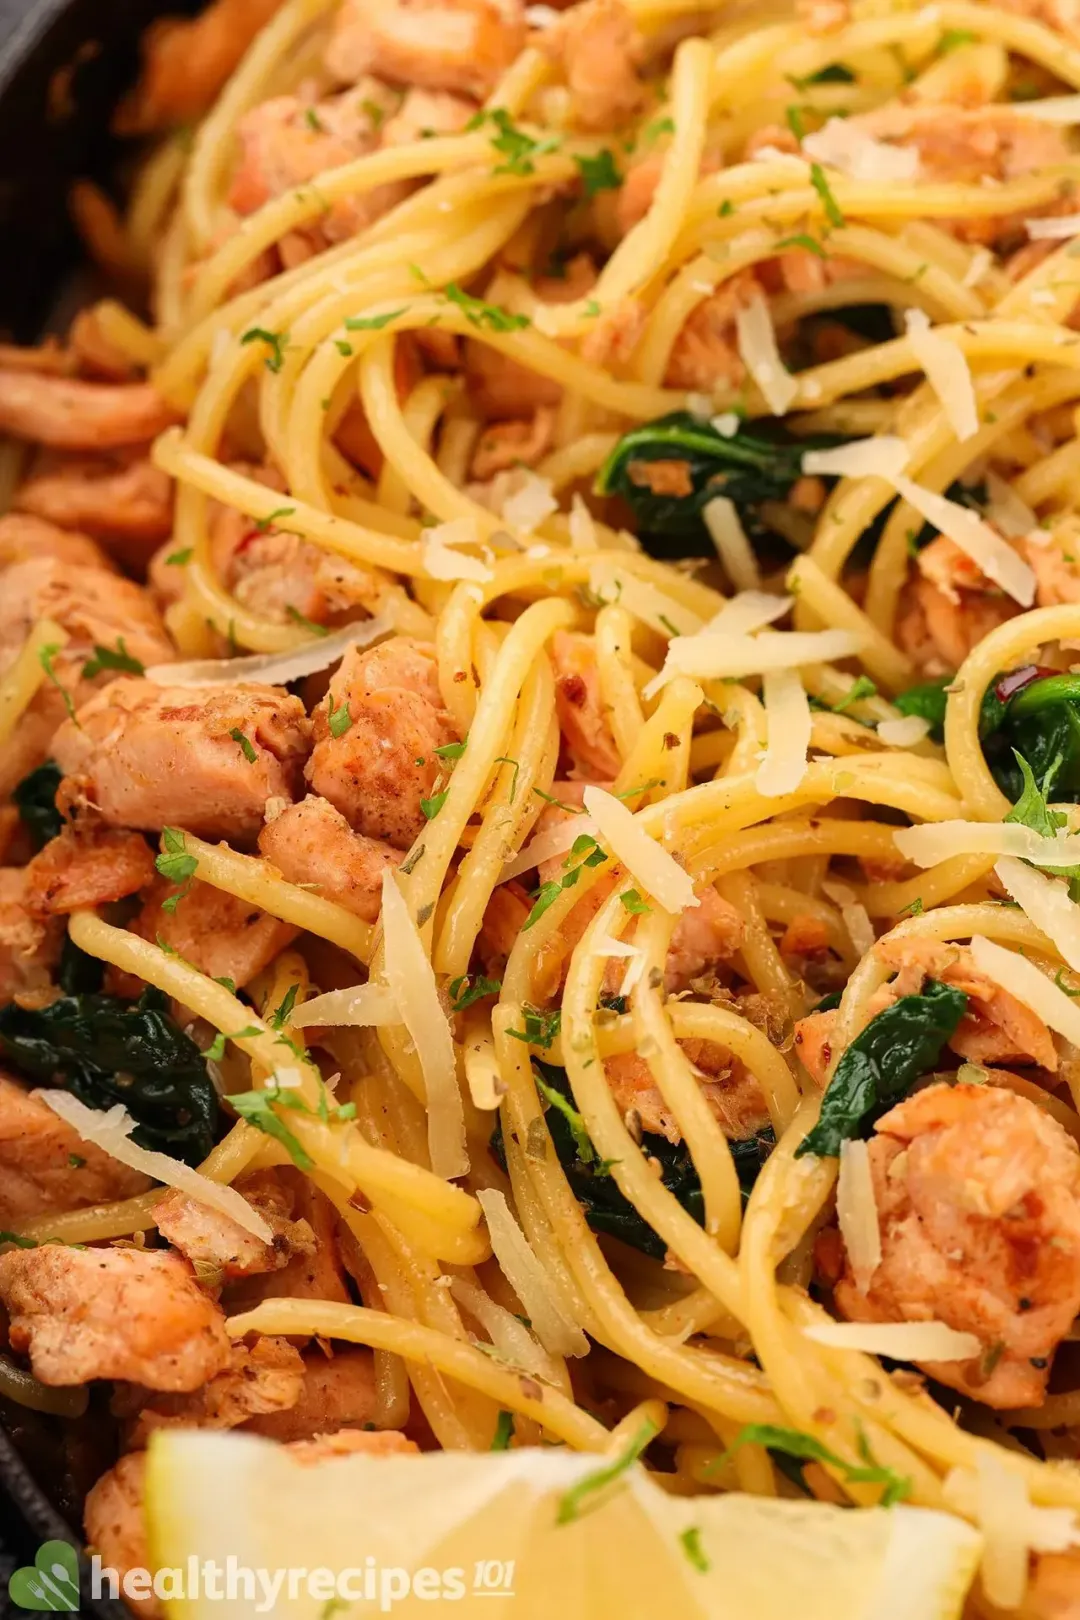 A close-up shot of a salmon pasta featuring spaghetti, cooked salmon cubes, shredded parmesan cheese, and cooked spinach